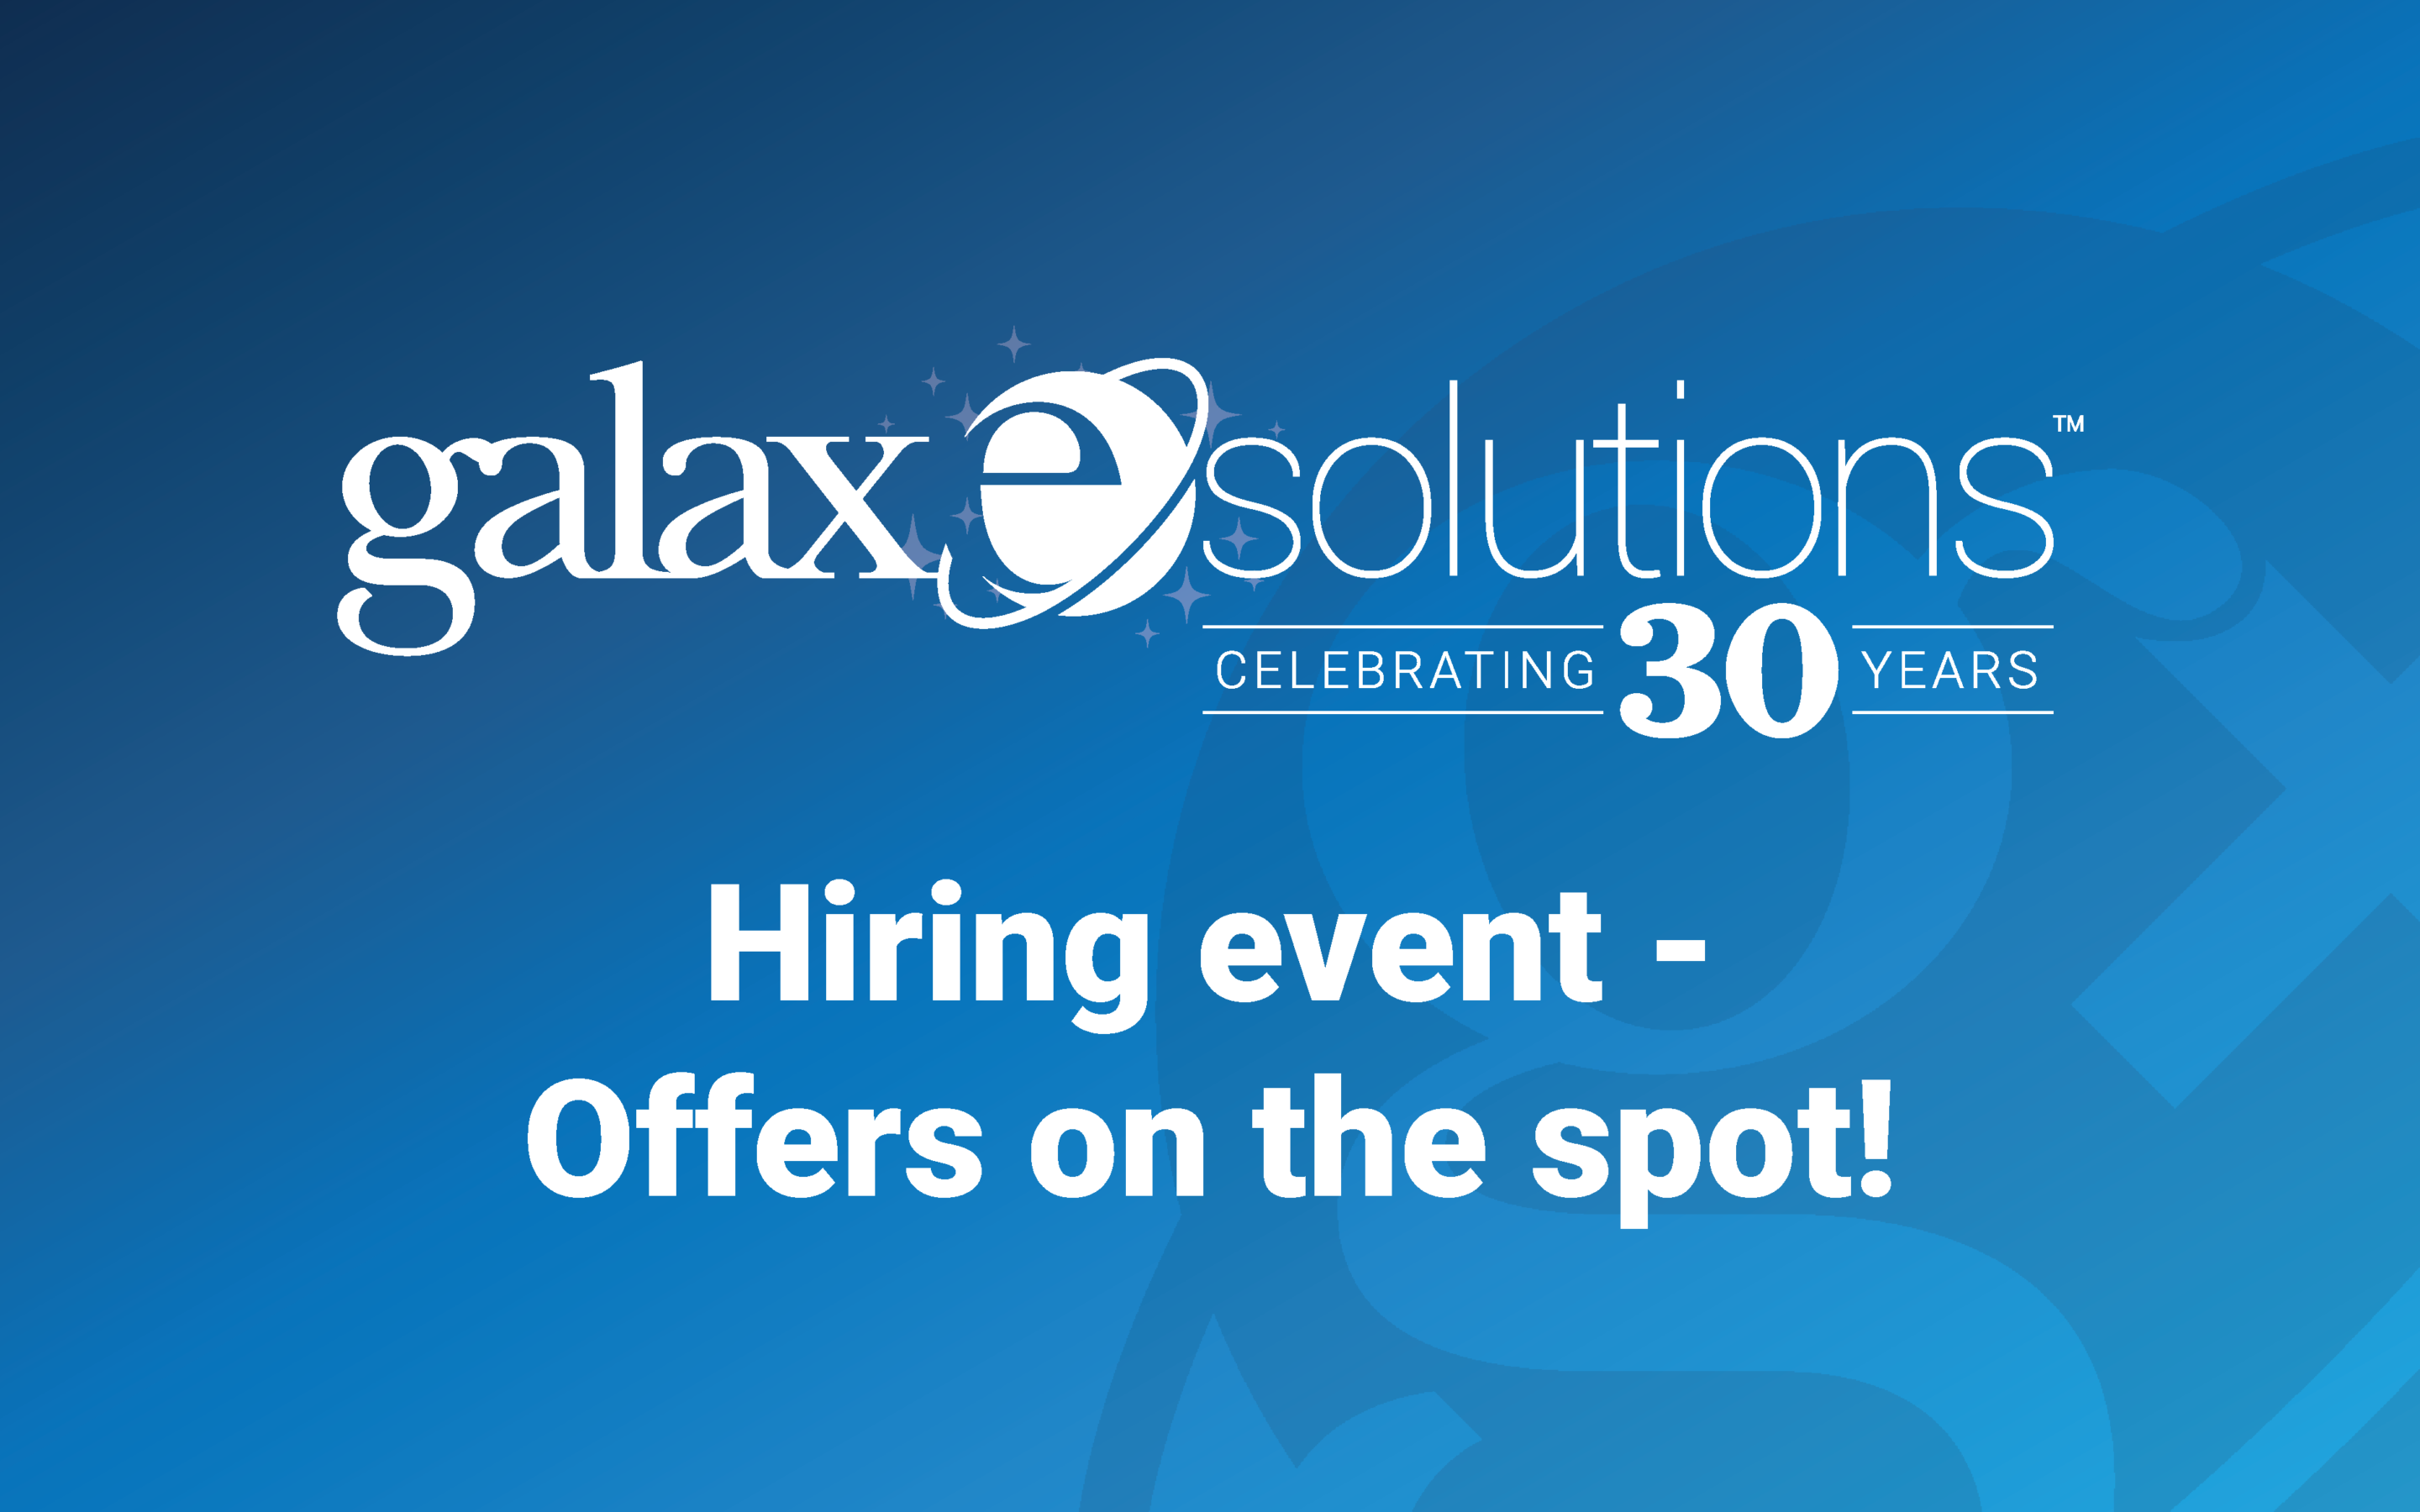 GalaxE.Solutions Announces Hartford Hiring Event on March 4th